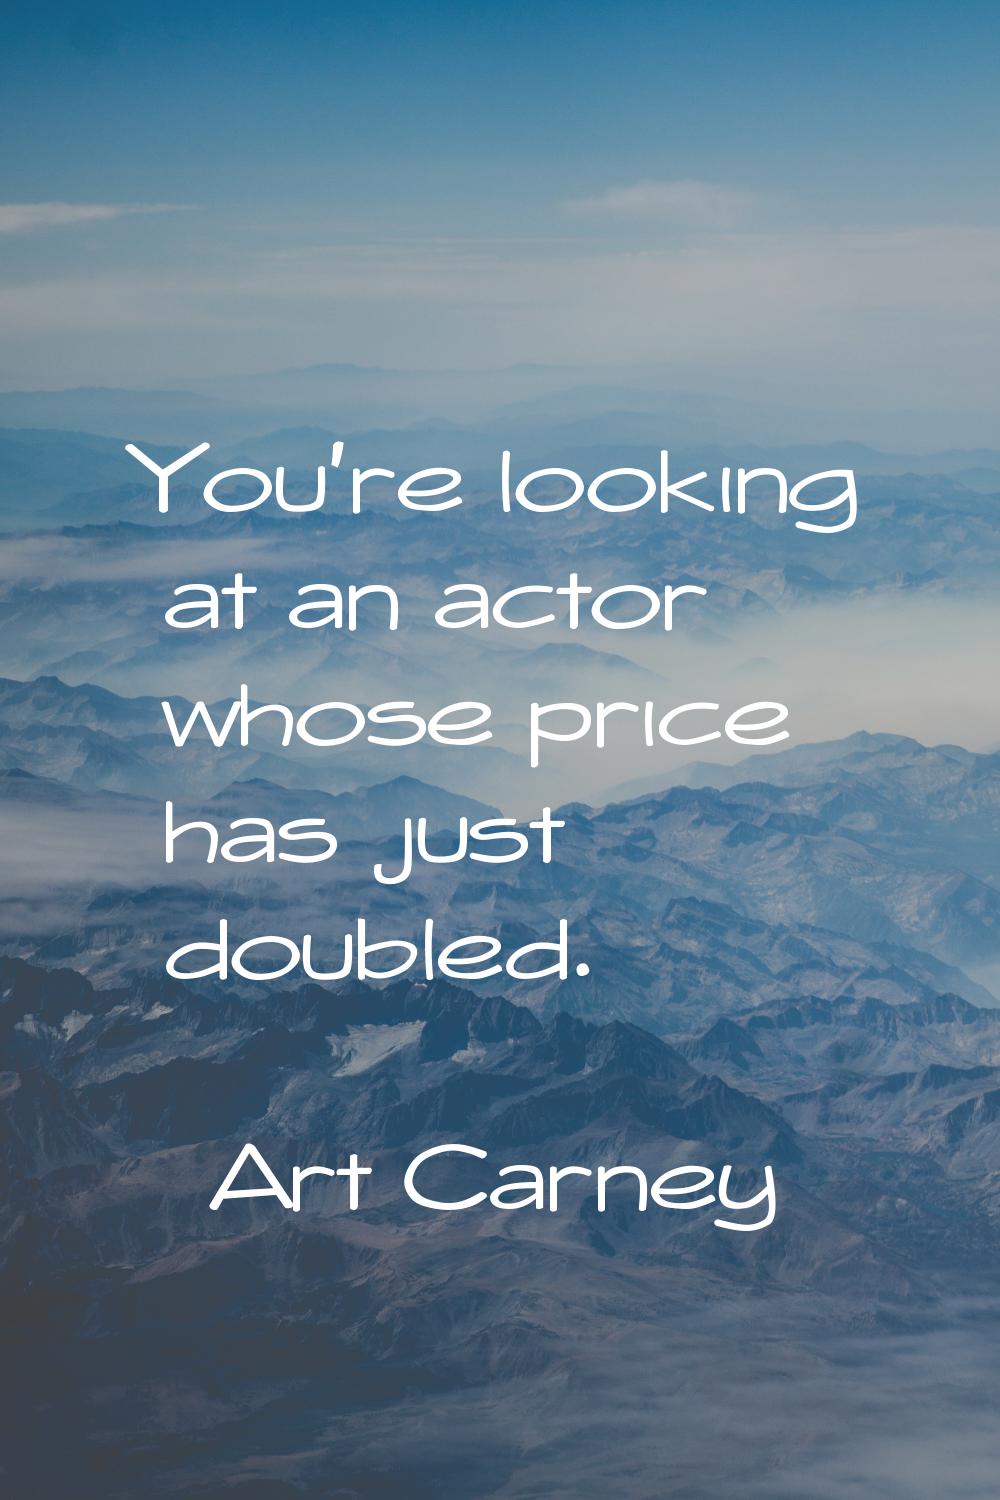 You're looking at an actor whose price has just doubled.